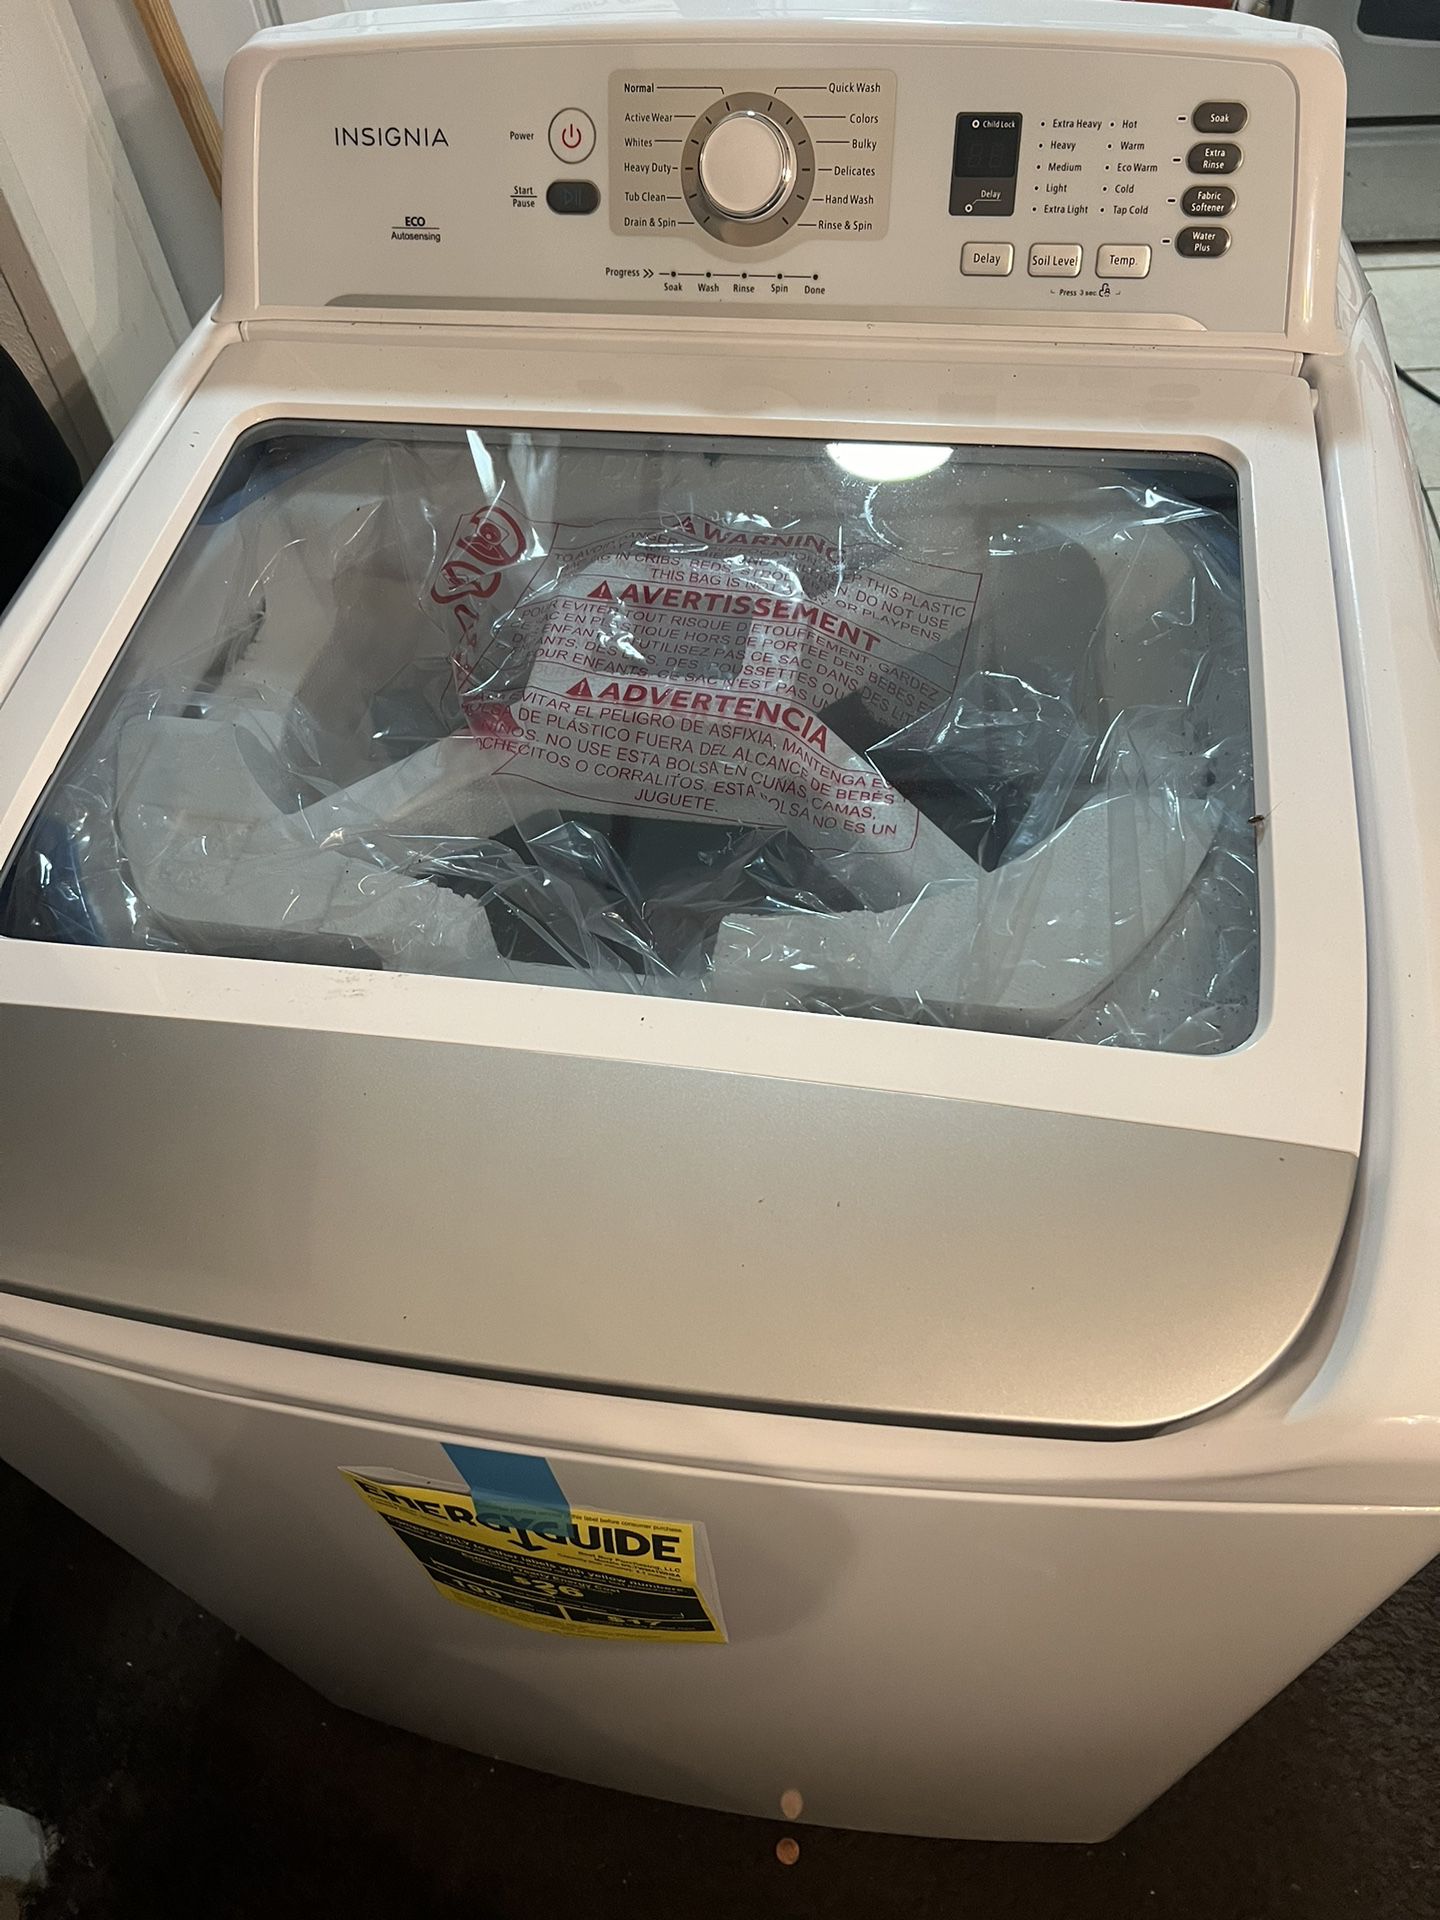 Insignia Fully Functional Washer